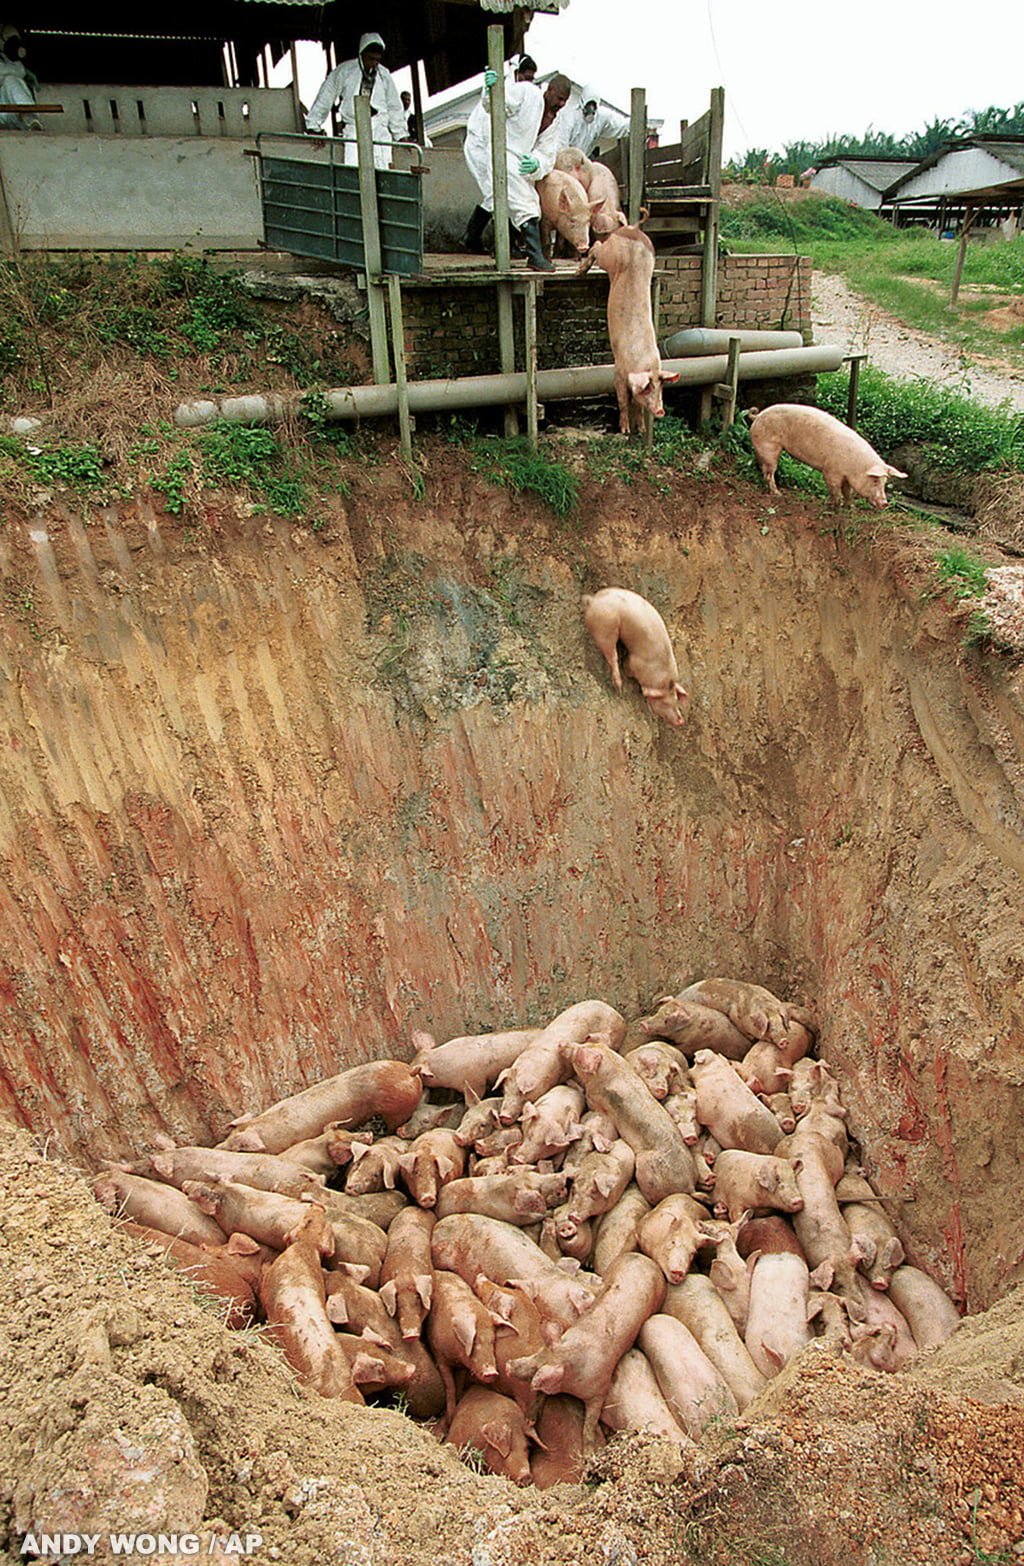 Pigs buried alive in Malaysia.